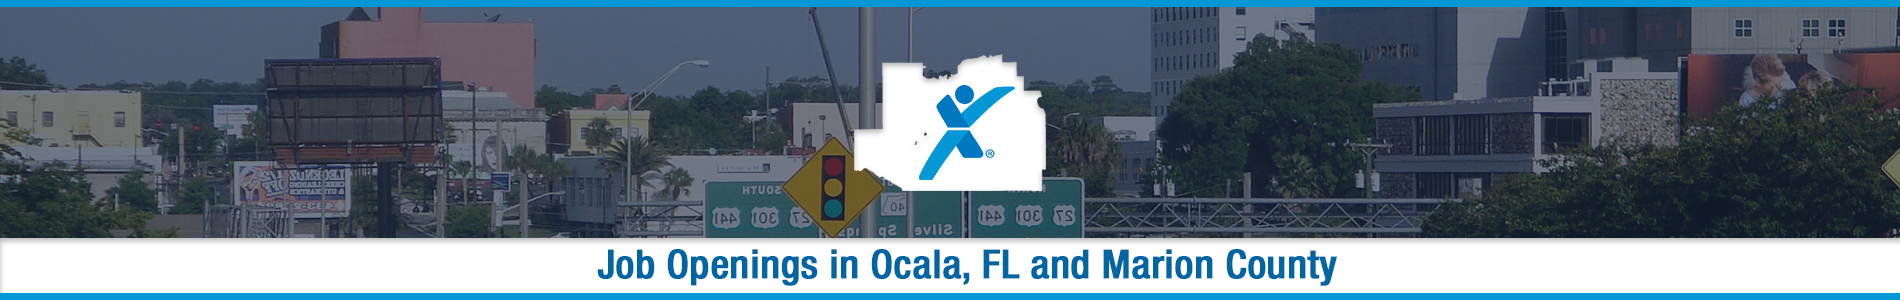 Job Openings in Ocala, FL - Express Employment Professionals will get you hired!